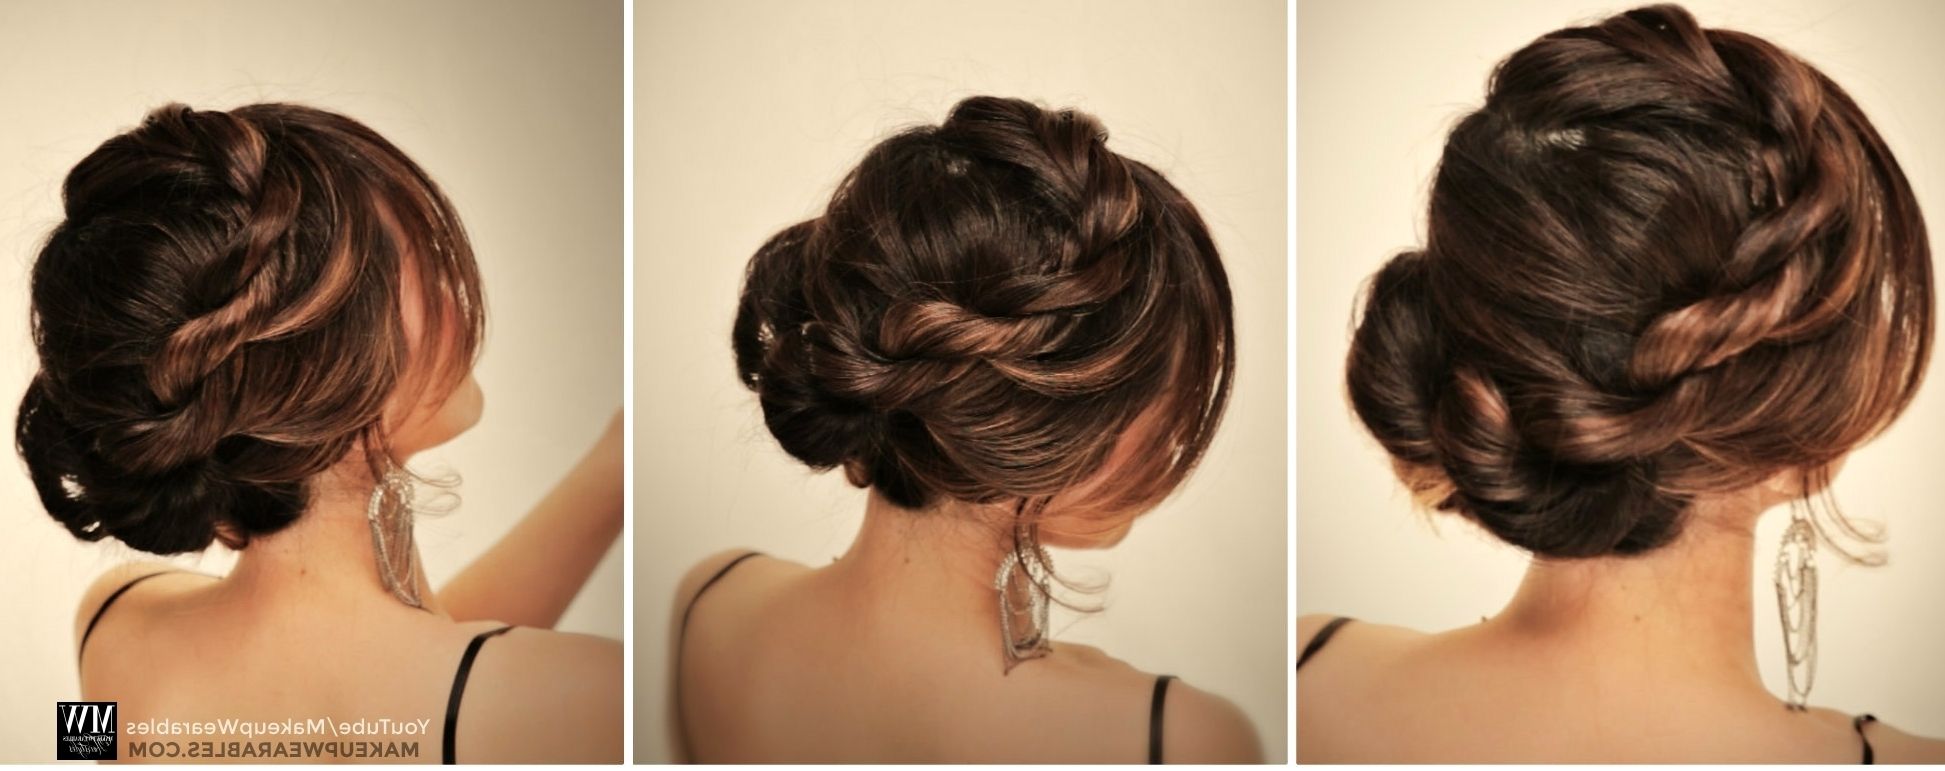 How To: 5 Amazingly Cute + Easy Hairstyles With A Simple Twist Regarding Hair Updo Hairstyles For Long Hair (View 7 of 15)